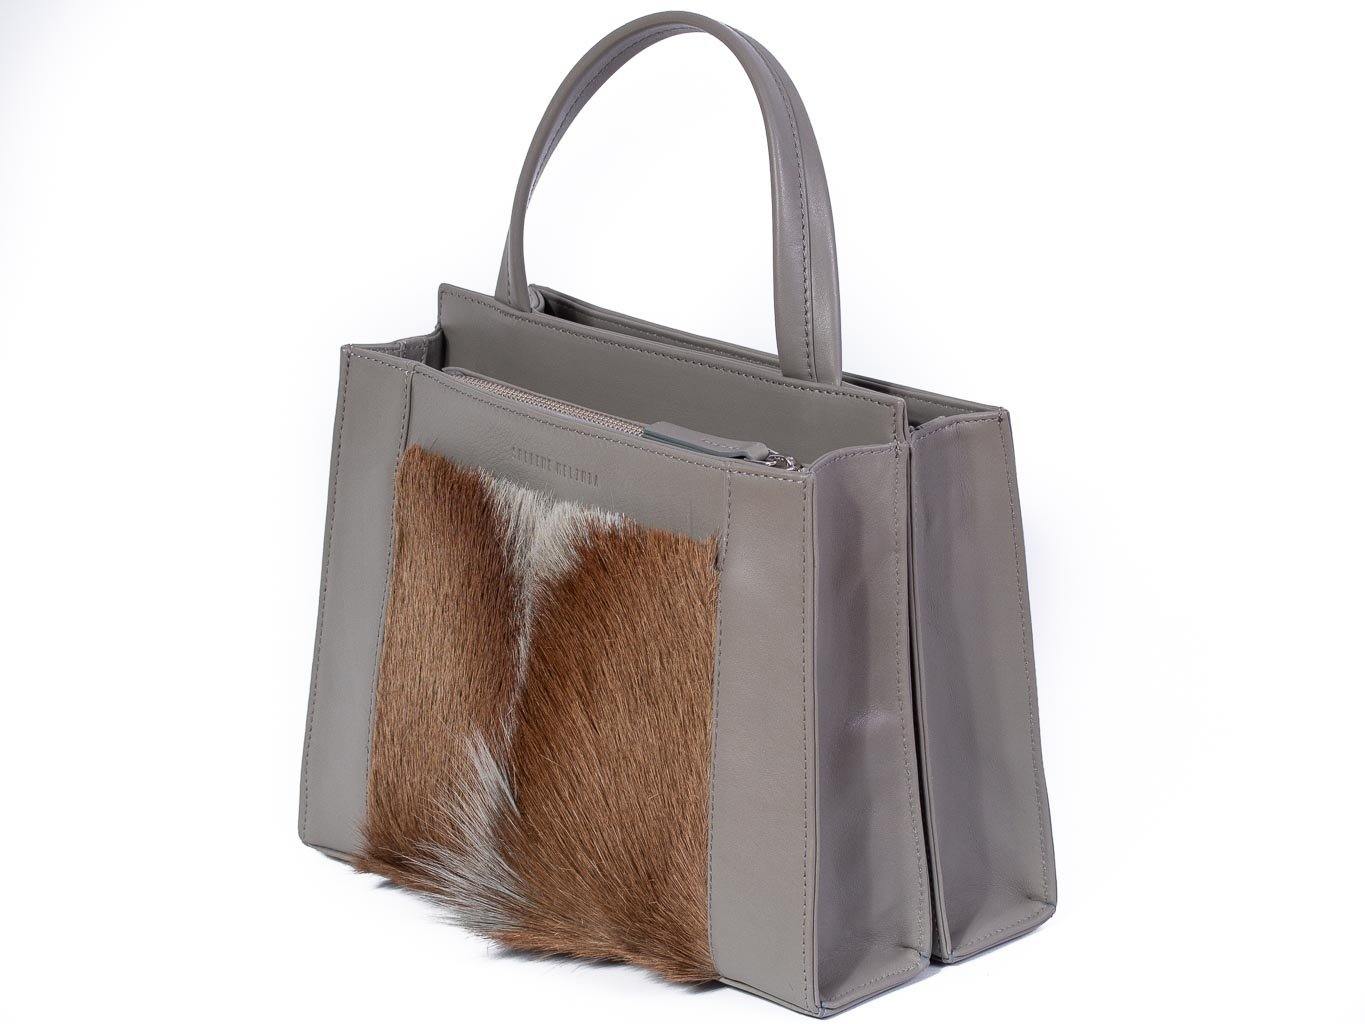 Top Handle Springbok Handbag in Slate Grey with a fan feature by Sherene Melinda front